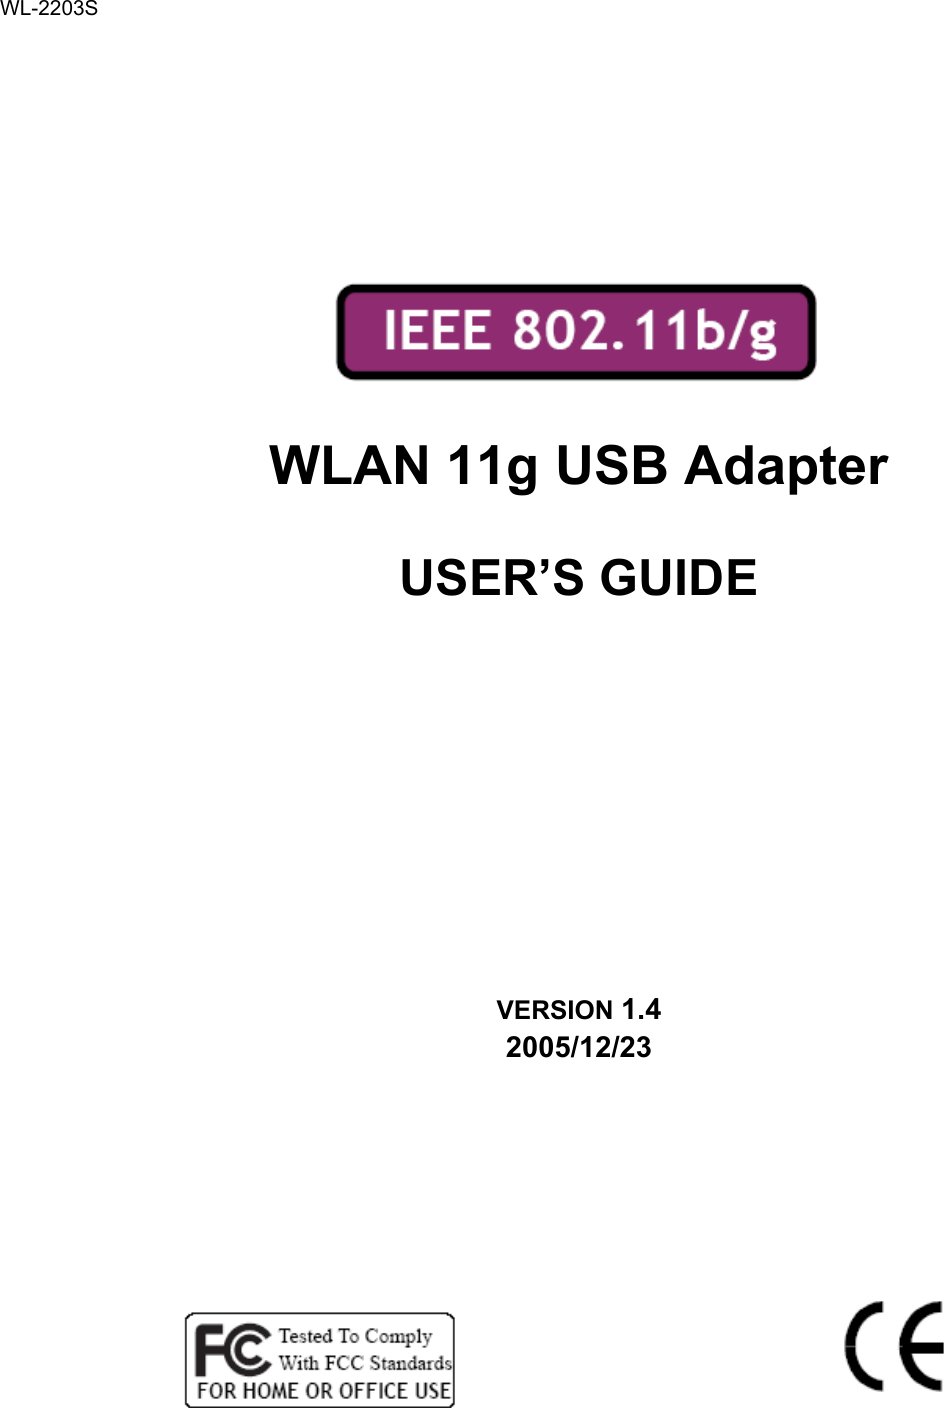          WLAN 11g USB Adapter  USER’S GUIDE      VERSION 1.4 2005/12/23             WL-2203S